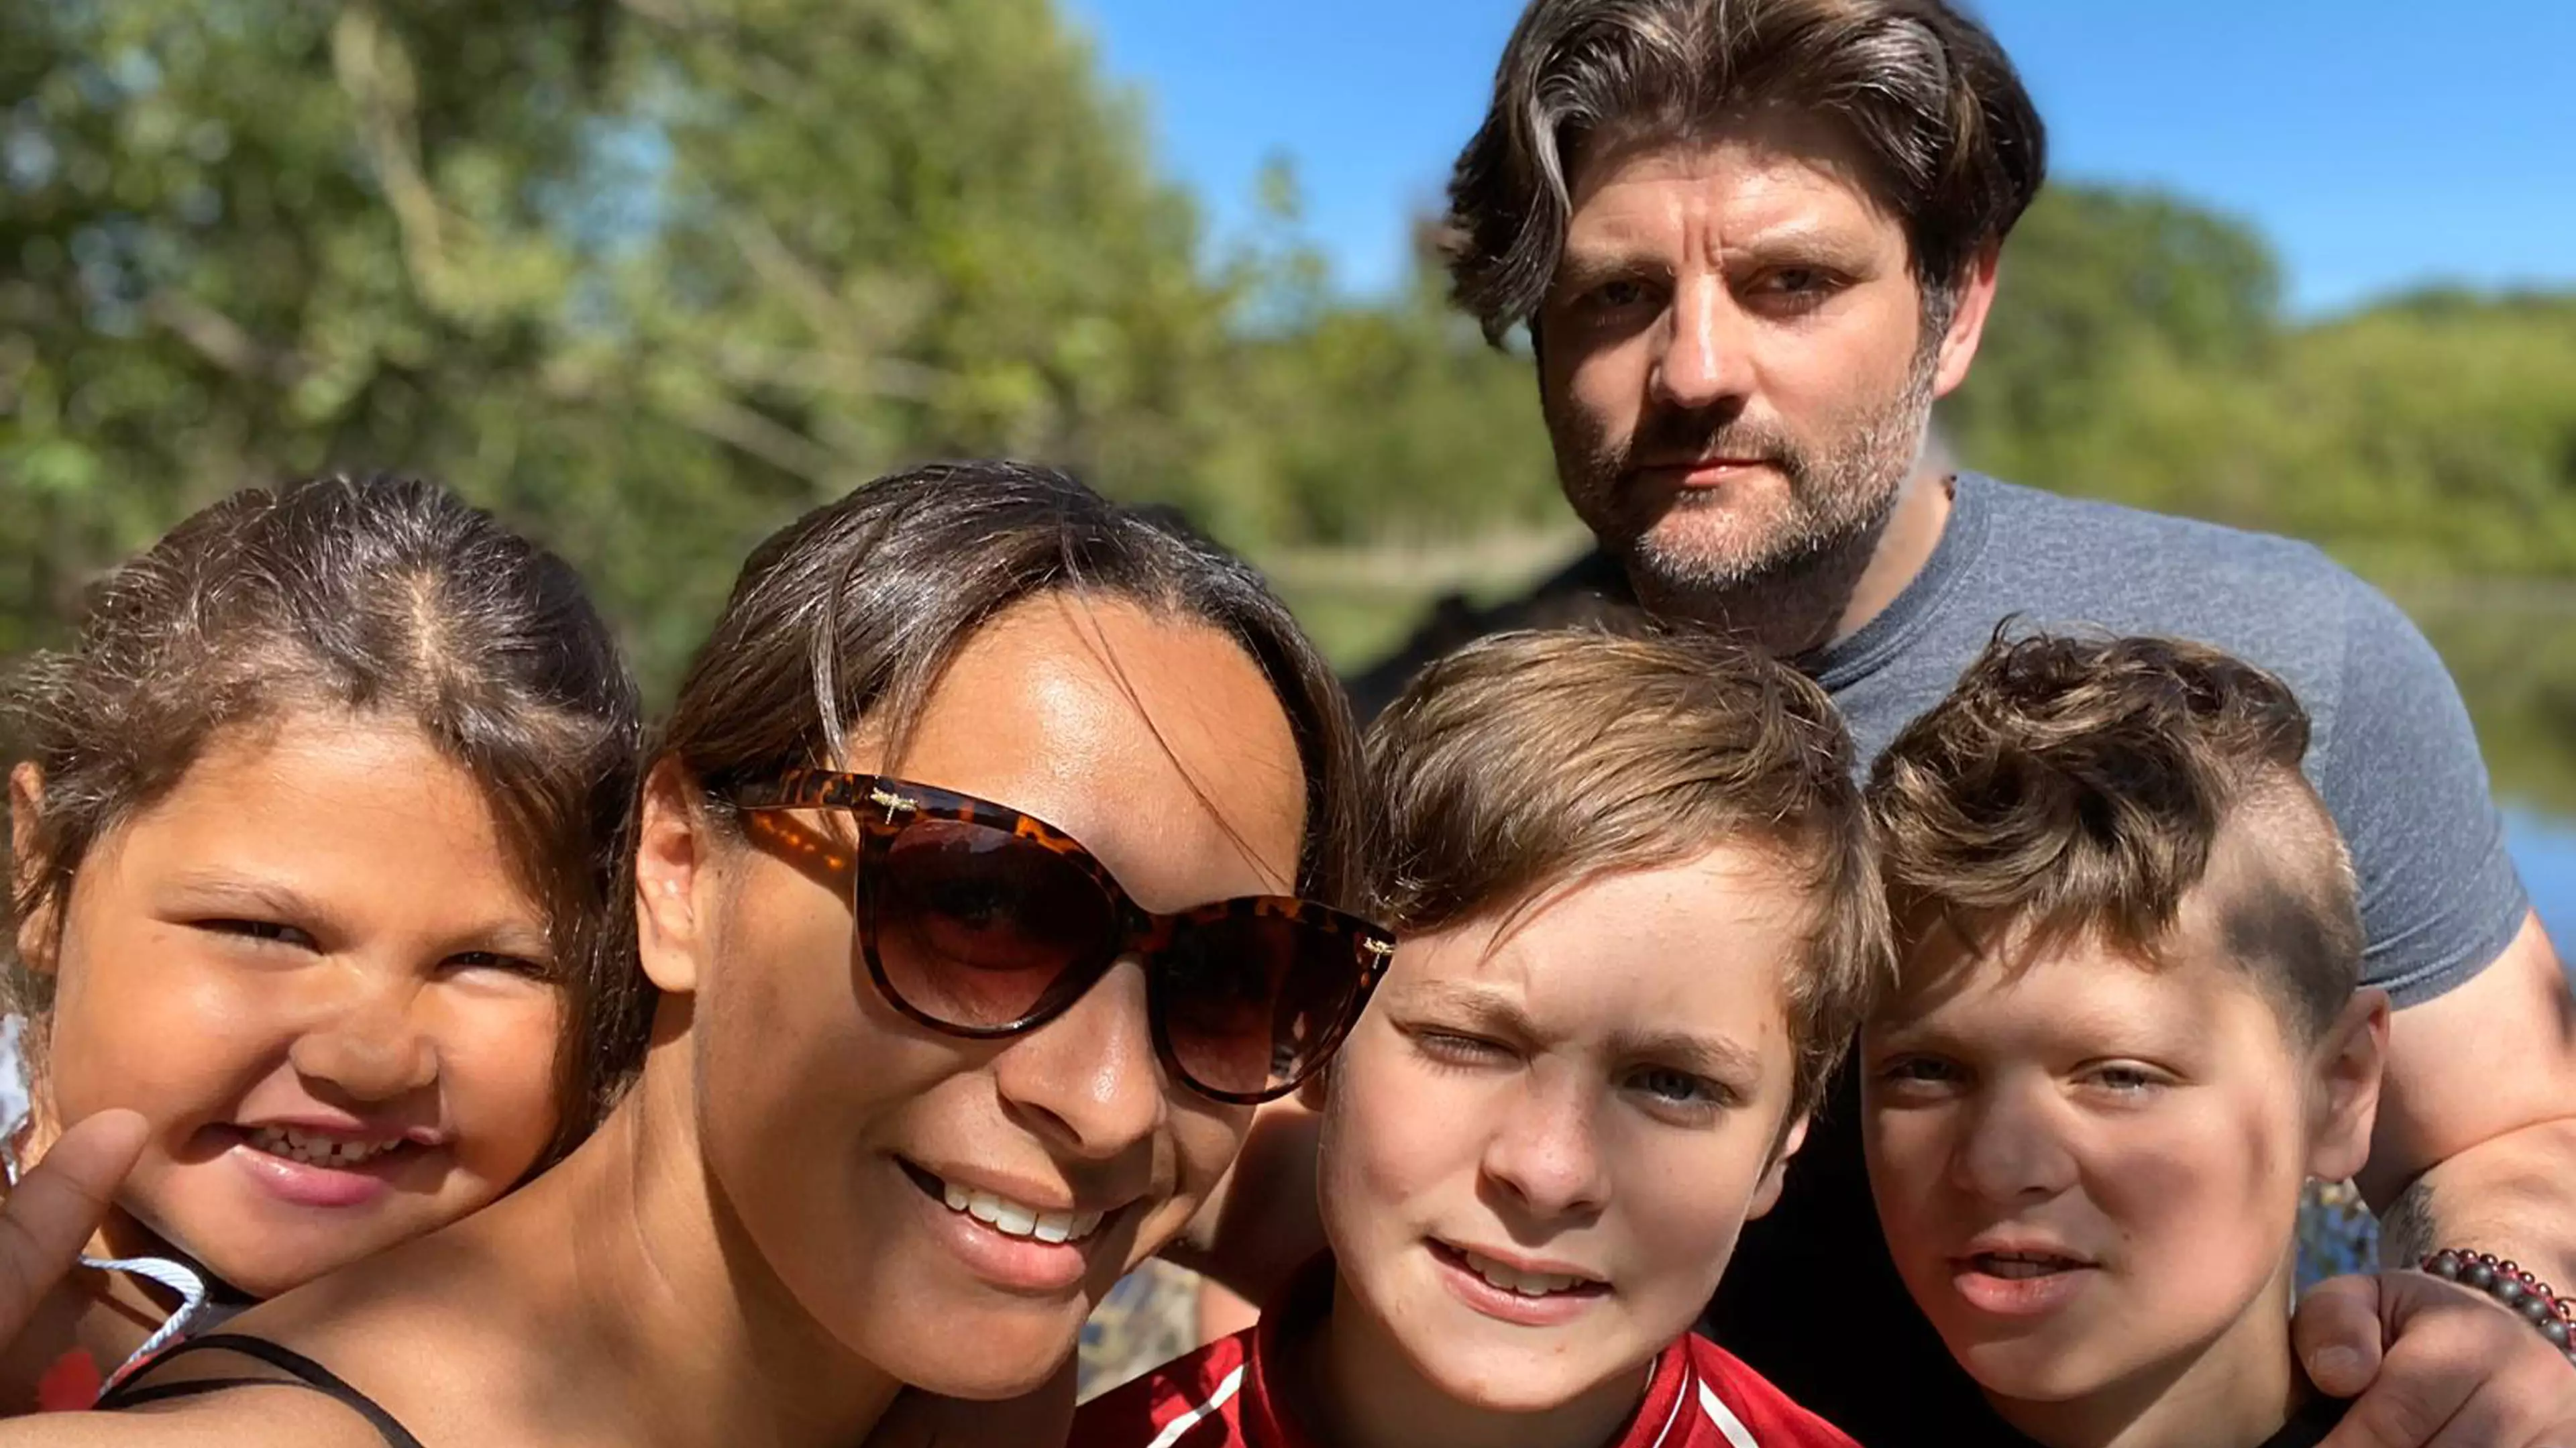 British Mum Shares Her Pain Over Continually Being Asked About Her Biracial Children